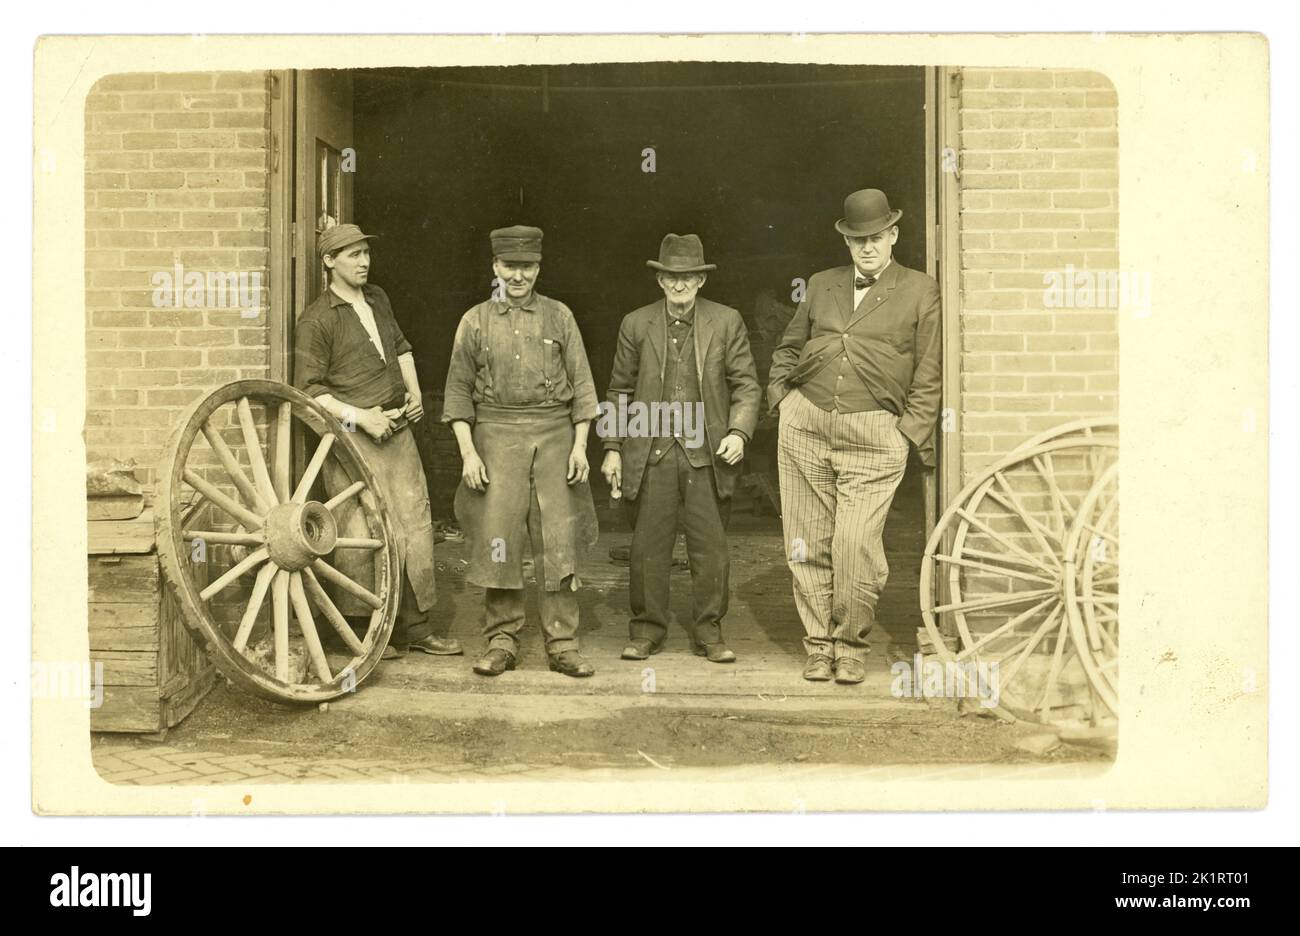 Original very clear, early 1900's American postcard of 3 wheelwrights, overseer maybe in pinstripe trousers, bowler hat, with cart wheels posing for a photo portrait outside their workshop. Some amazing real characters, workwear fashions, bowler hats. Room for copy space.  U.S.A. Circa 1919 Stock Photo